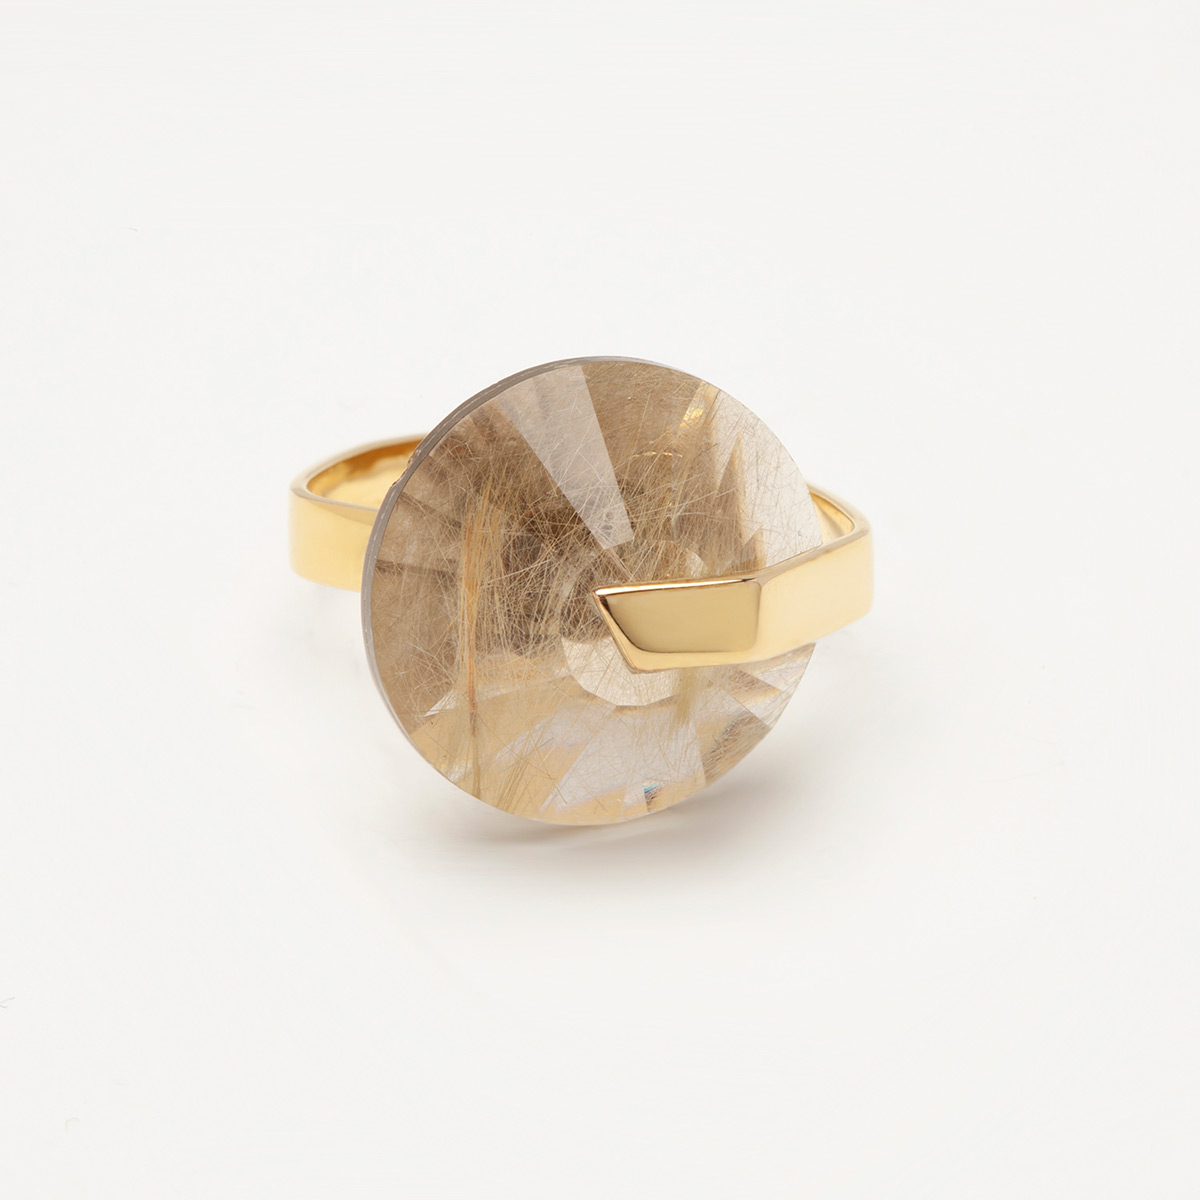 Handmade Gau ring in 18k gold plated 925 silver and rutilated quartz designed by Belen Bajo